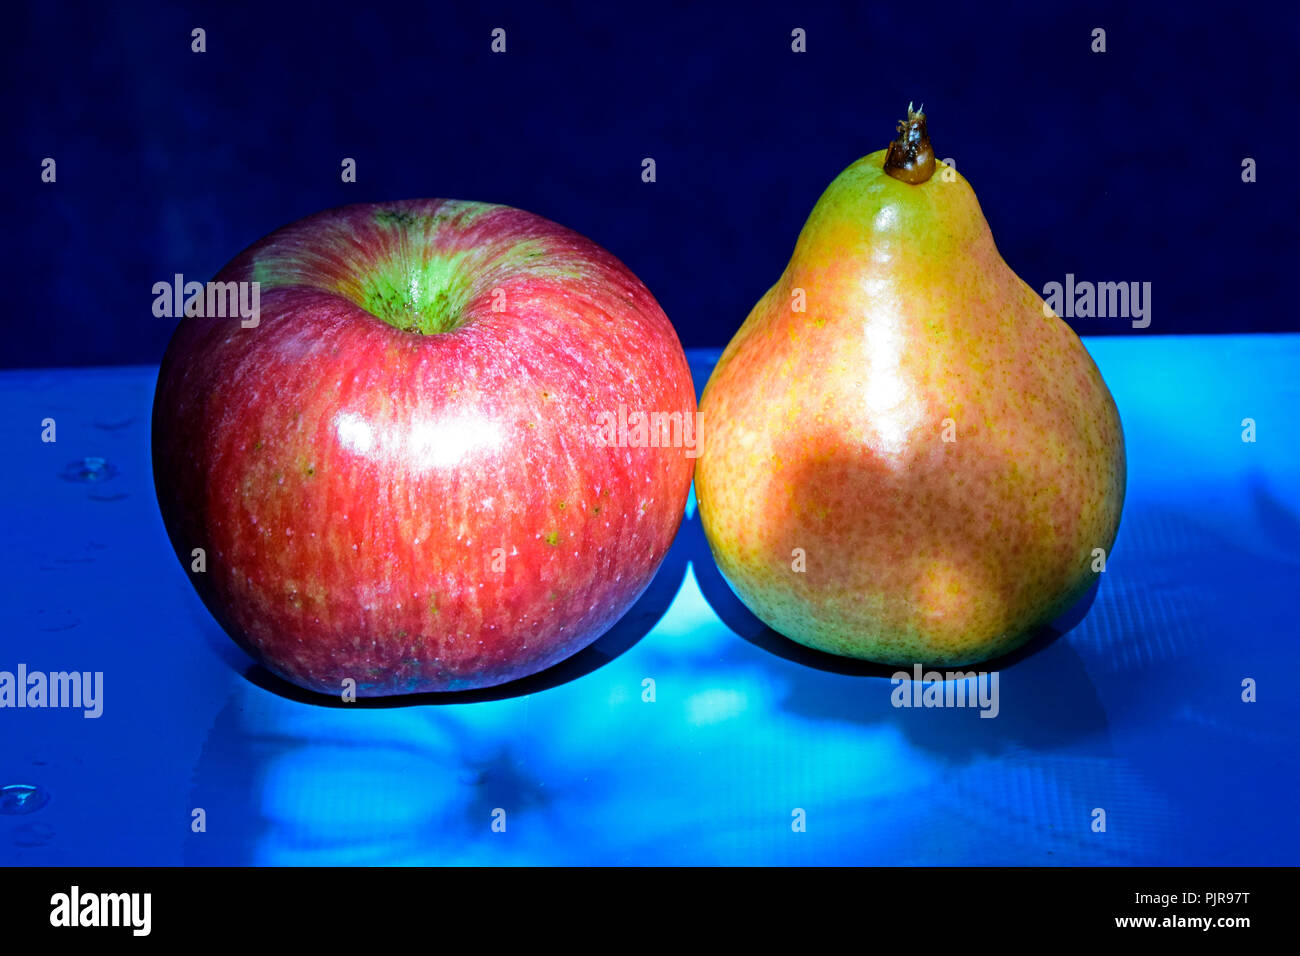 A streaked red apple and a yellow pear on a blue background Stock Photo